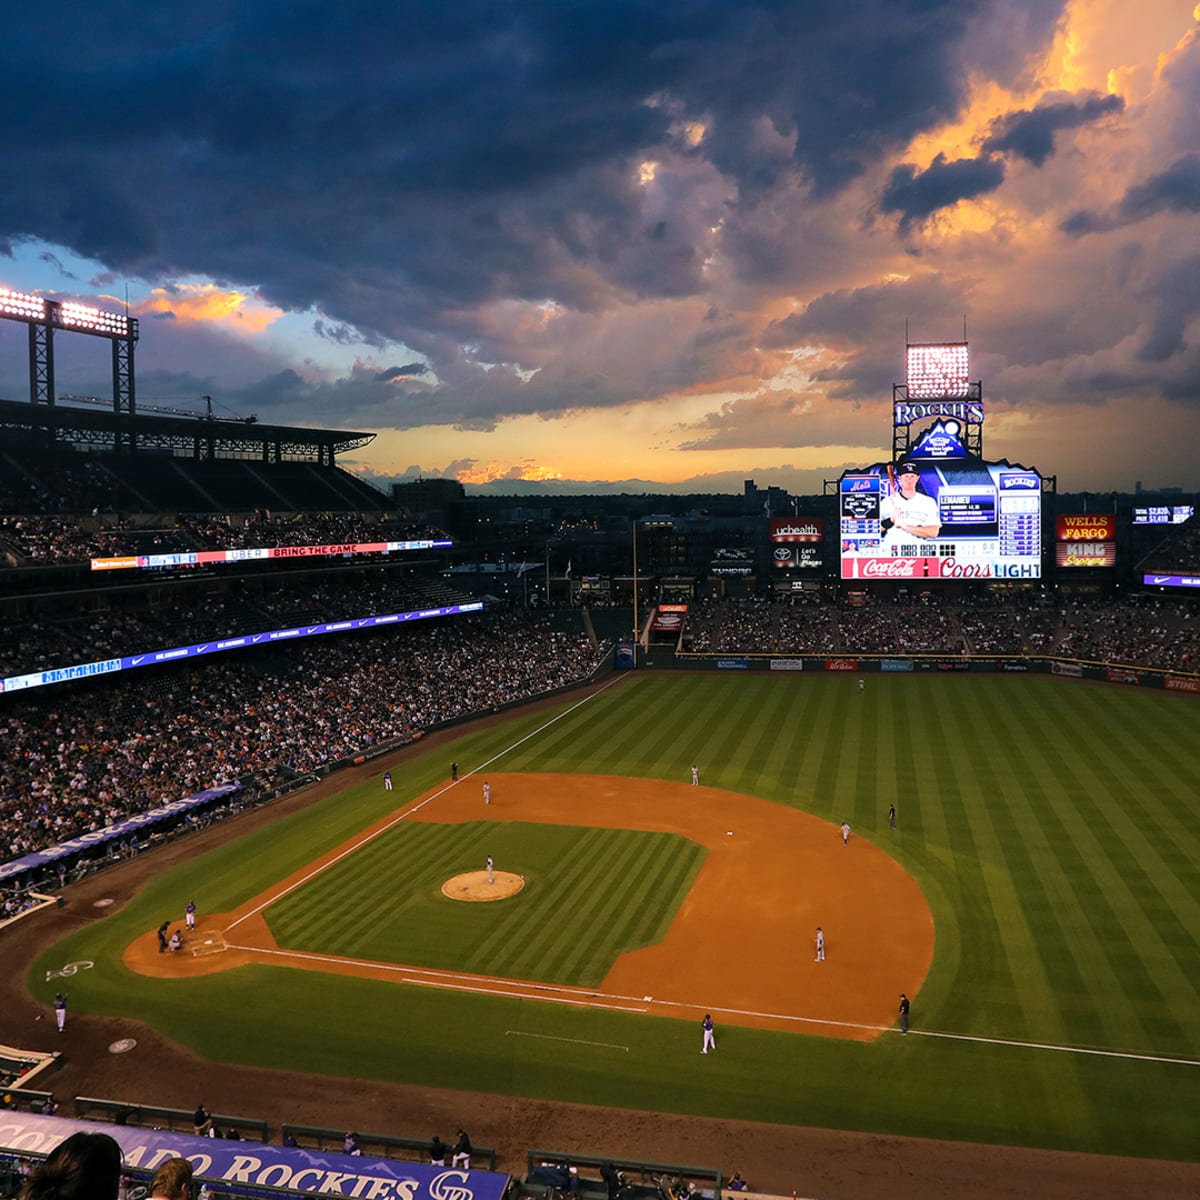 Best MLB Stadiums: Top 5 Ballparks In Baseball, According To